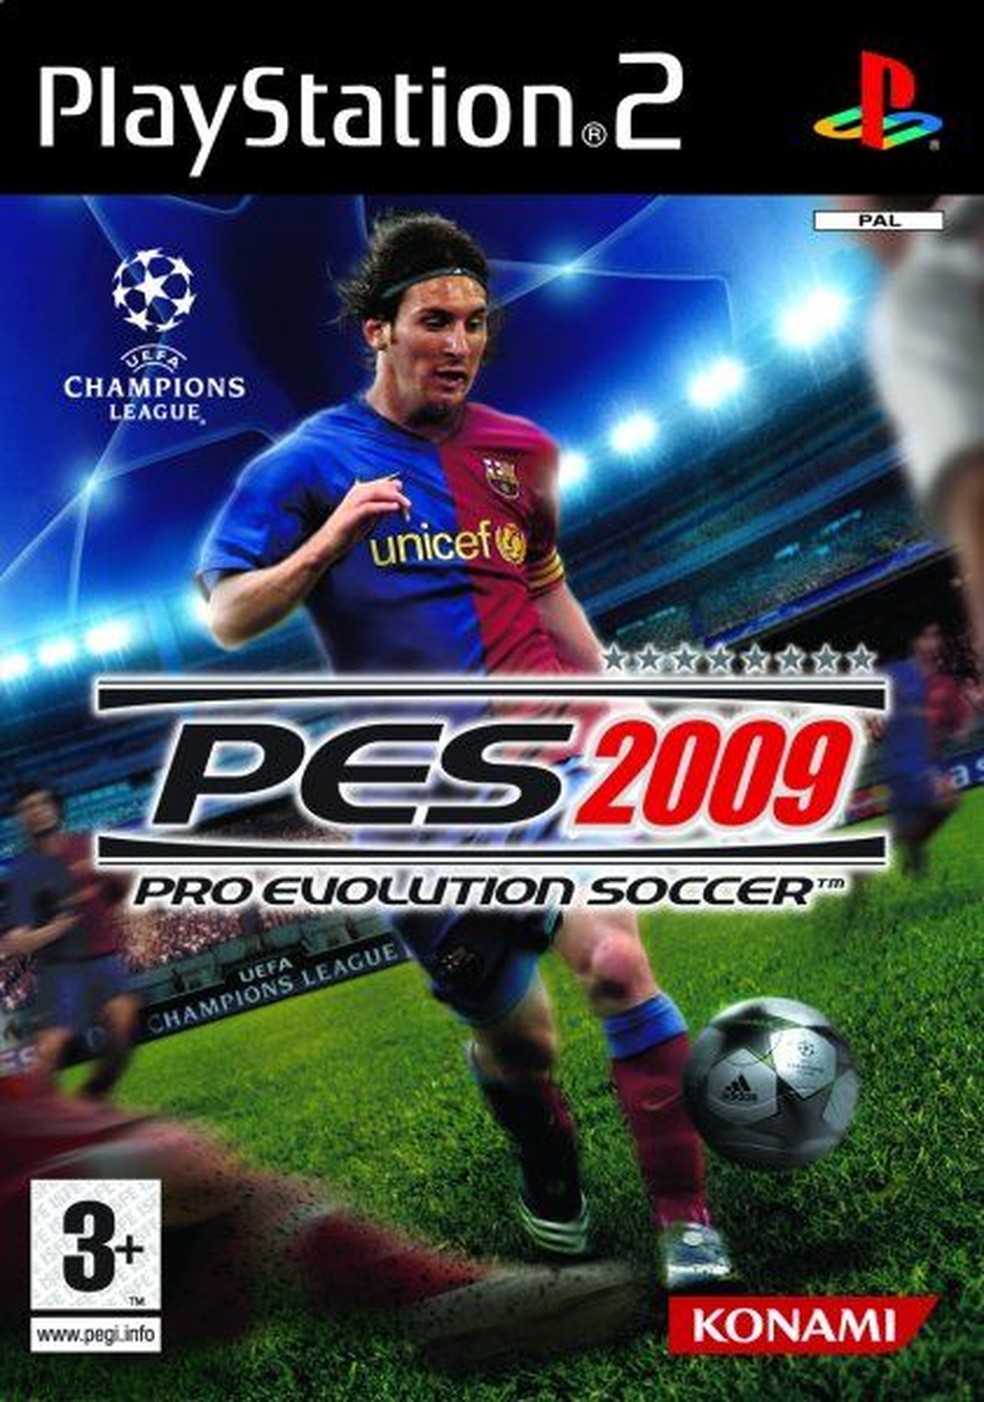 PES 2013 - Pro Evolution Soccer ROM Download - Sony PlayStation 2(PS2)